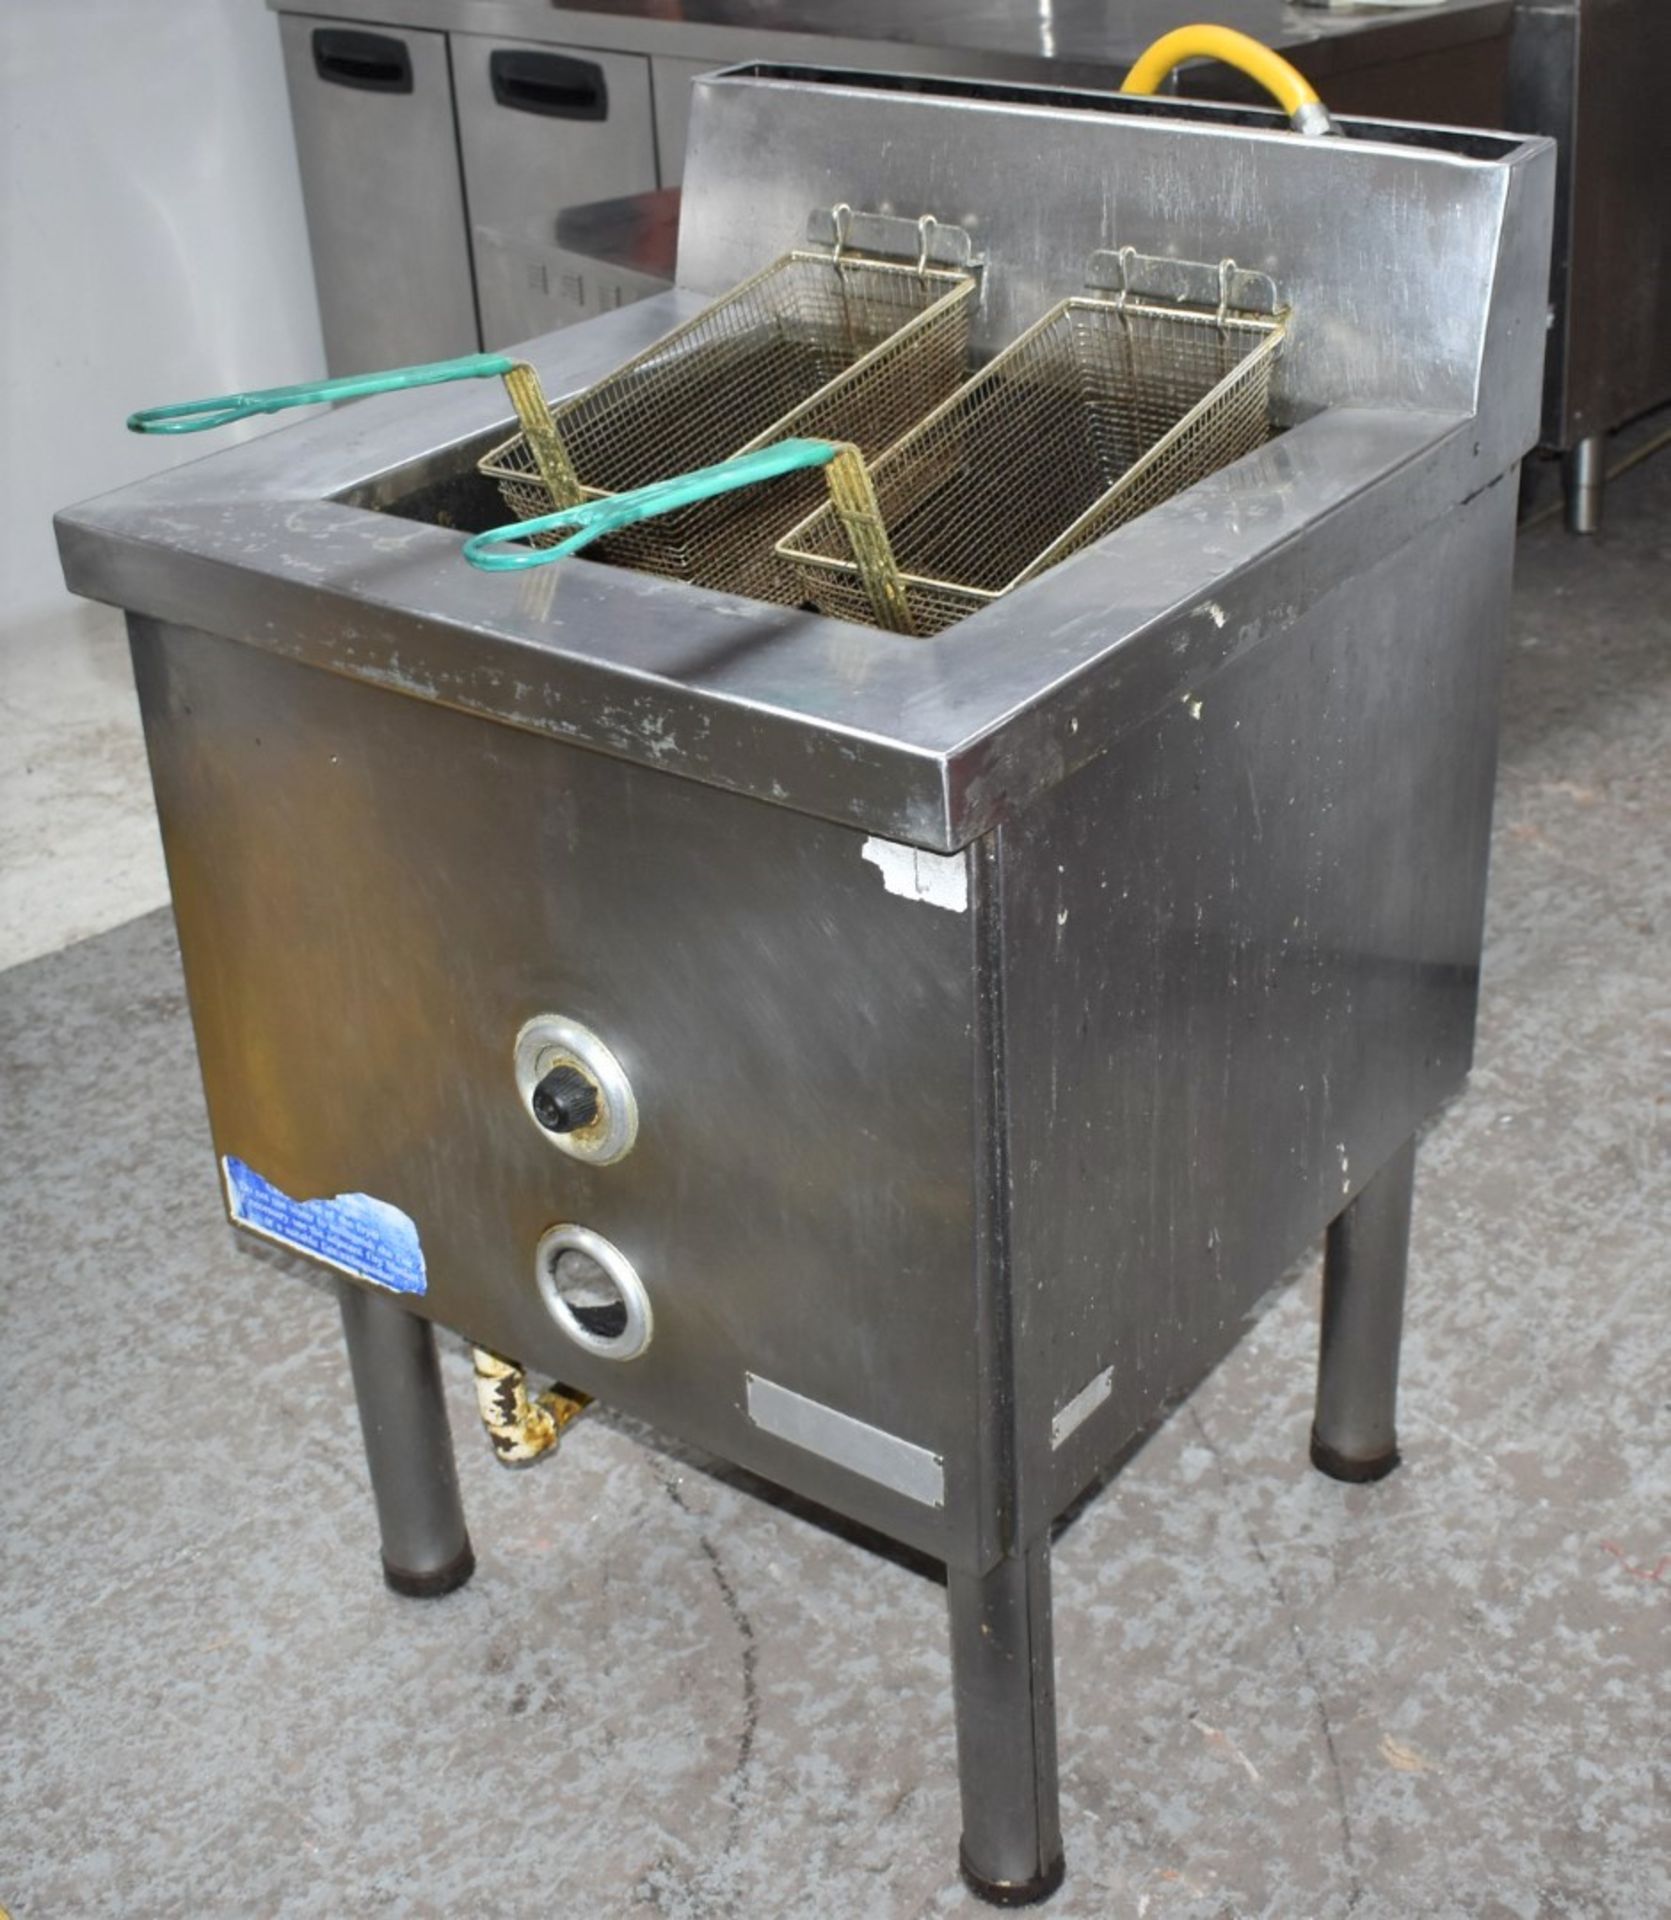 1 x Twin Basket Natural Gas Fryer With Stainless Steel Finish - H89 x W65.5 x D70 cms - CL459 -